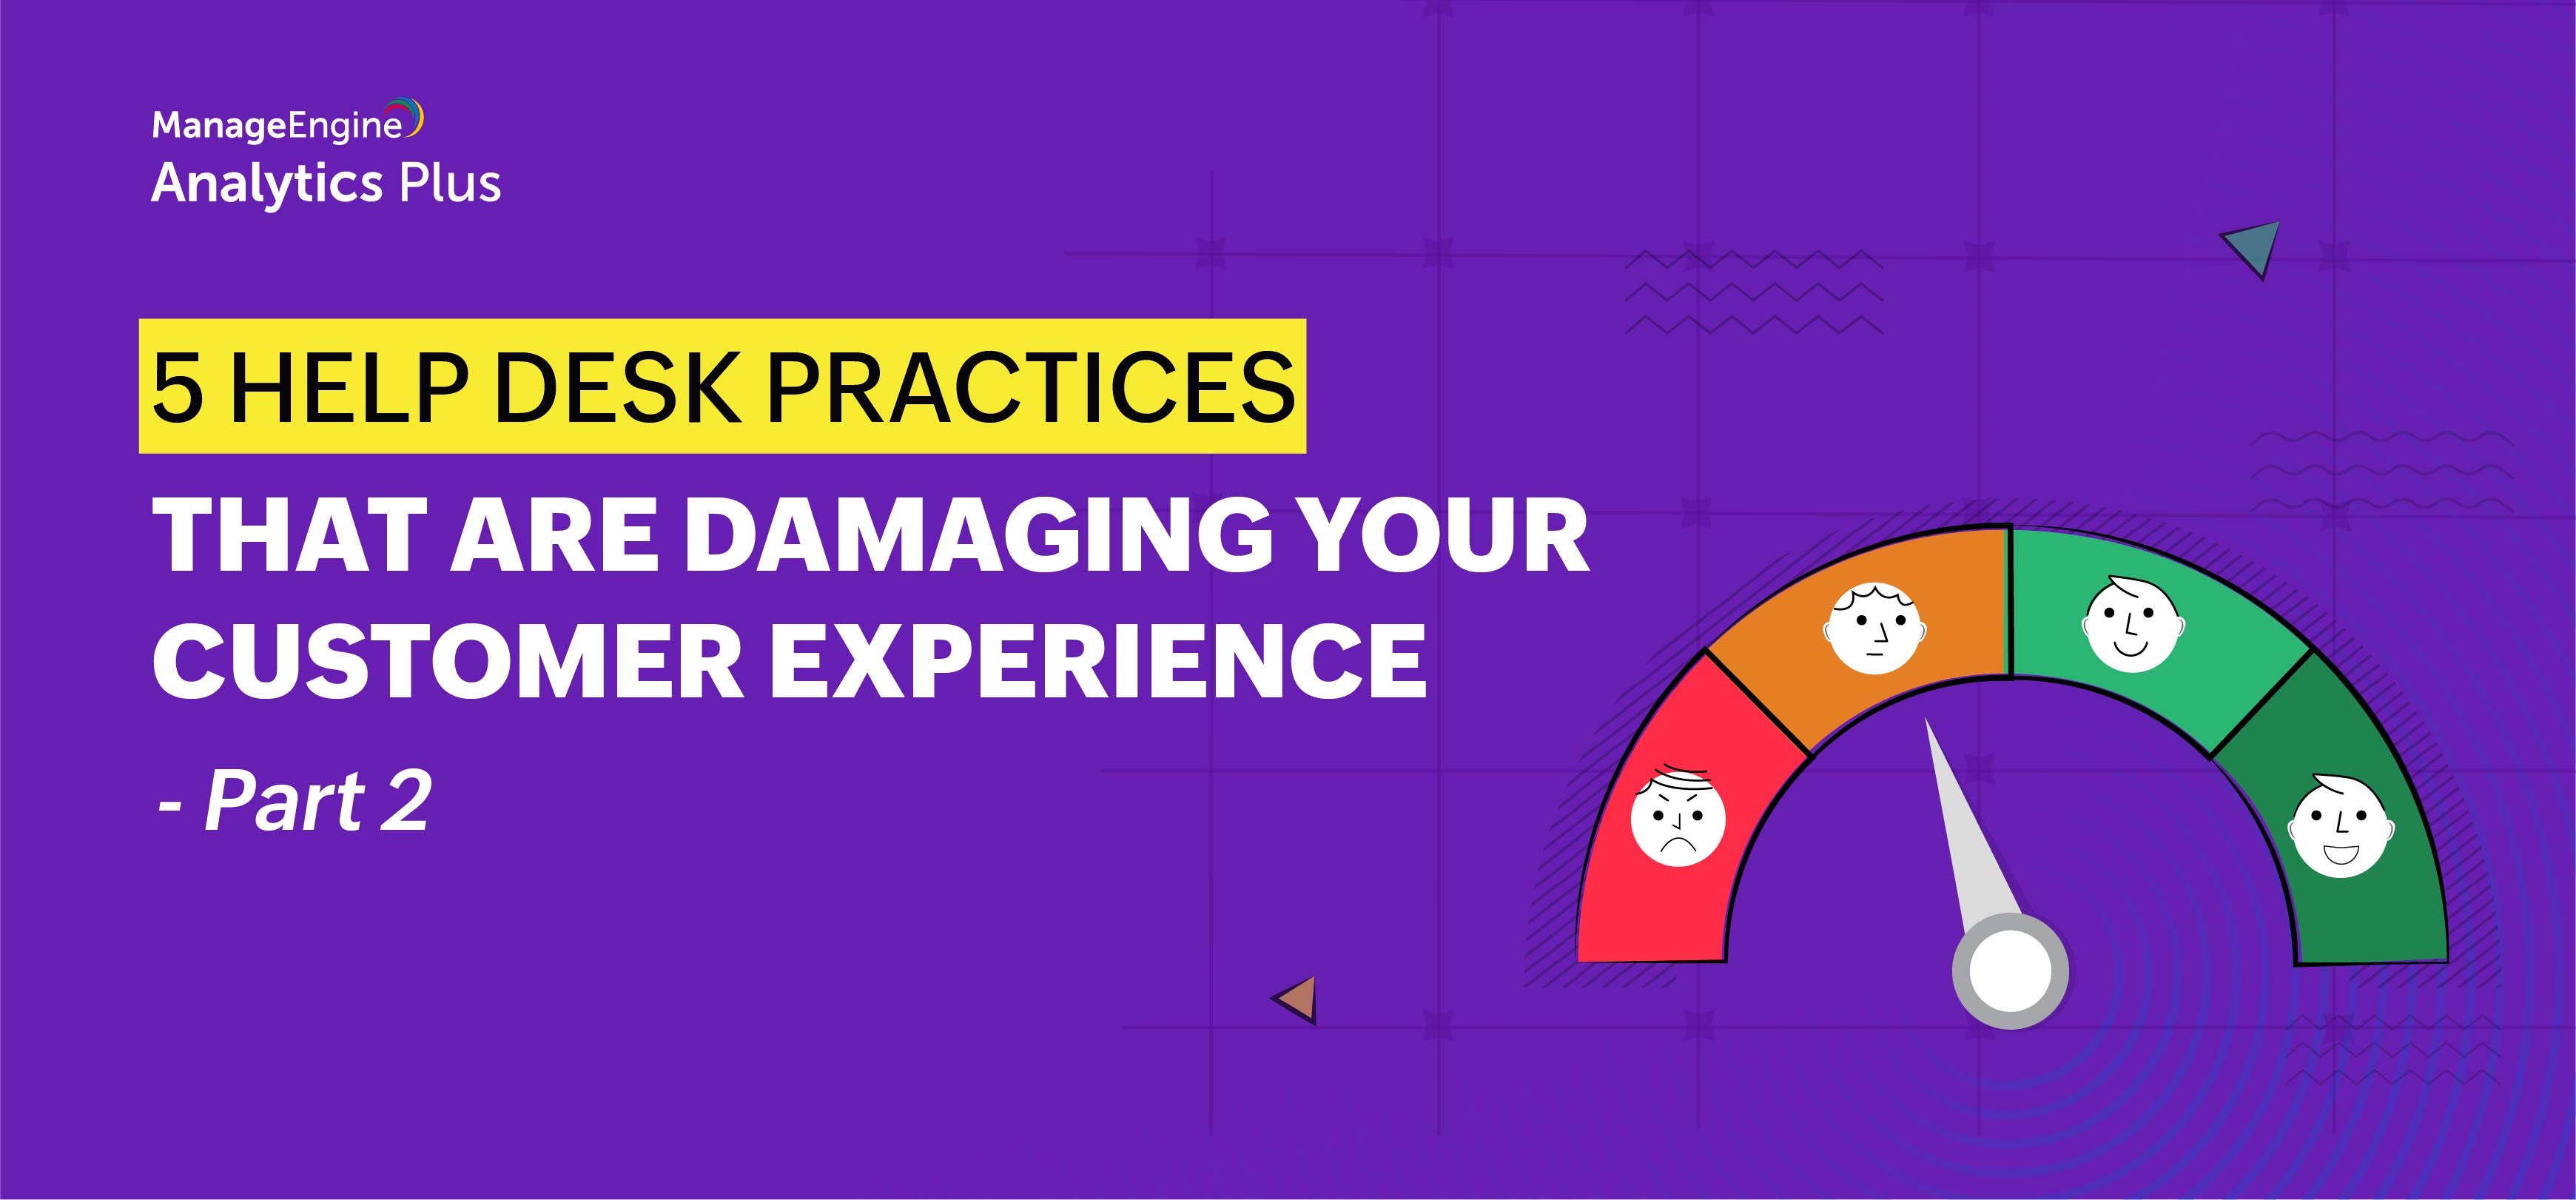 5 help desk practices that are damaging your customer experience—Part 2